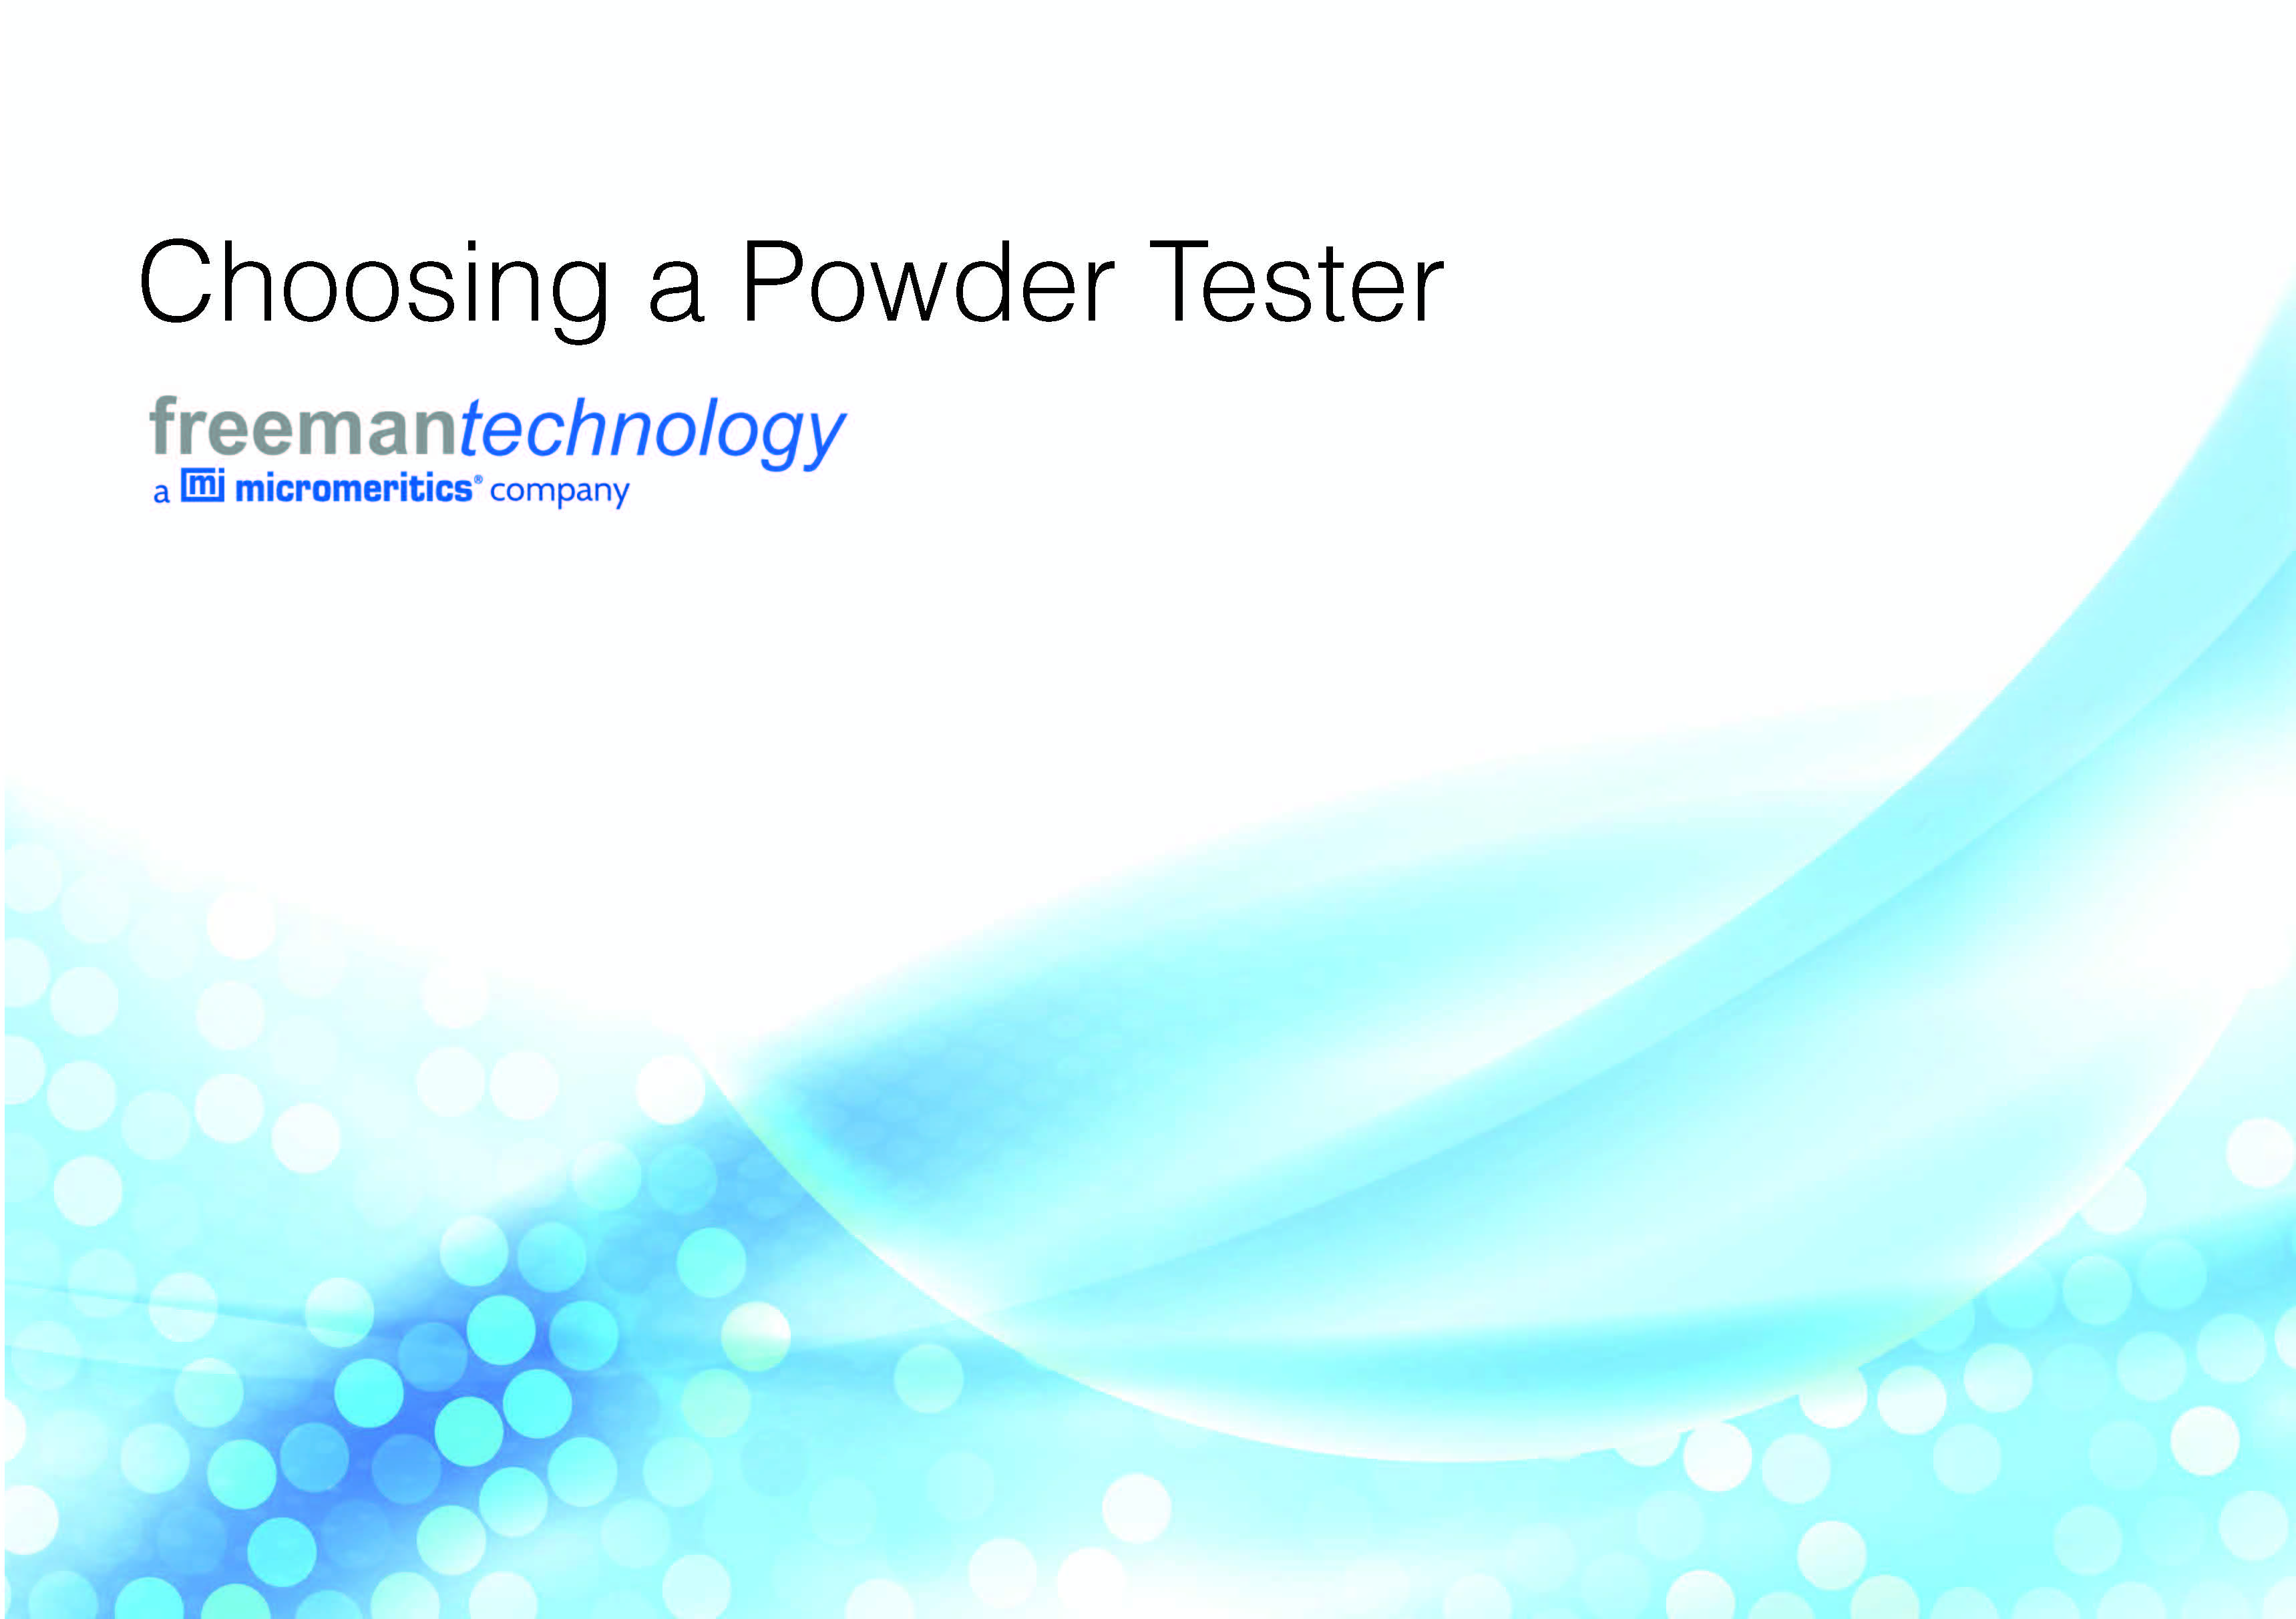 Freeman Technology reviews powder testing in new industry guide 'Choosing a Powder Tester'